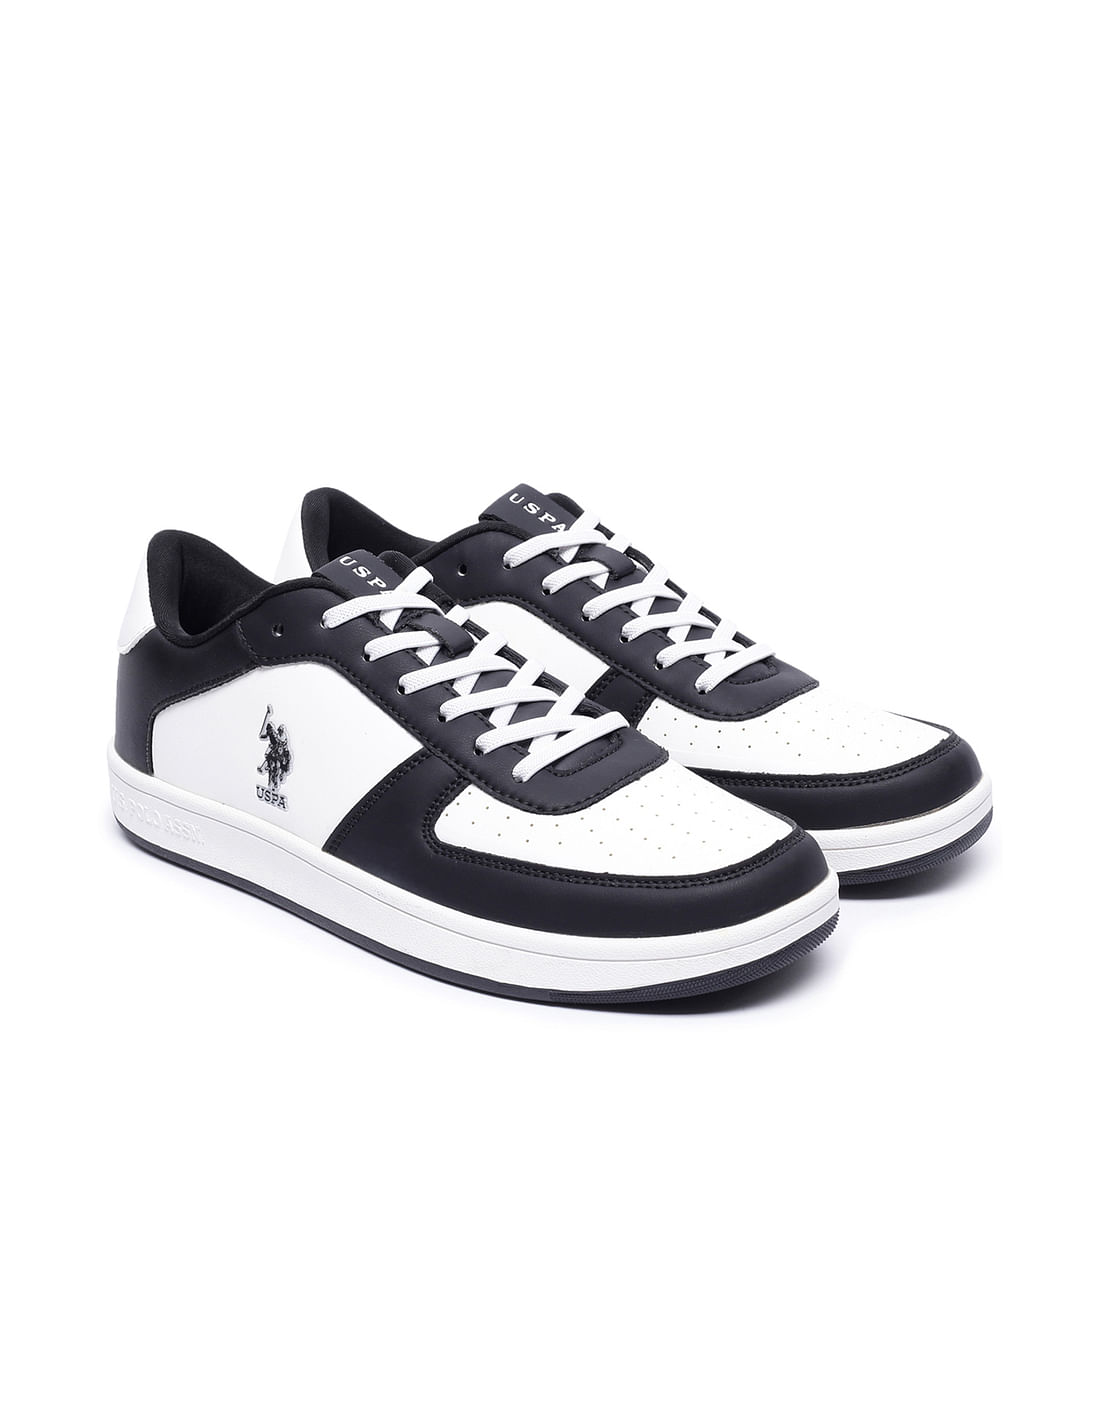 Men District Perforated Leather Sneakers Sporty Shoes White Black Grey  Casual Shoe For Woman Rubber Sole Trainer With Triangle Logo Sneaker From  Yingjing005, $100.51 | DHgate.Com